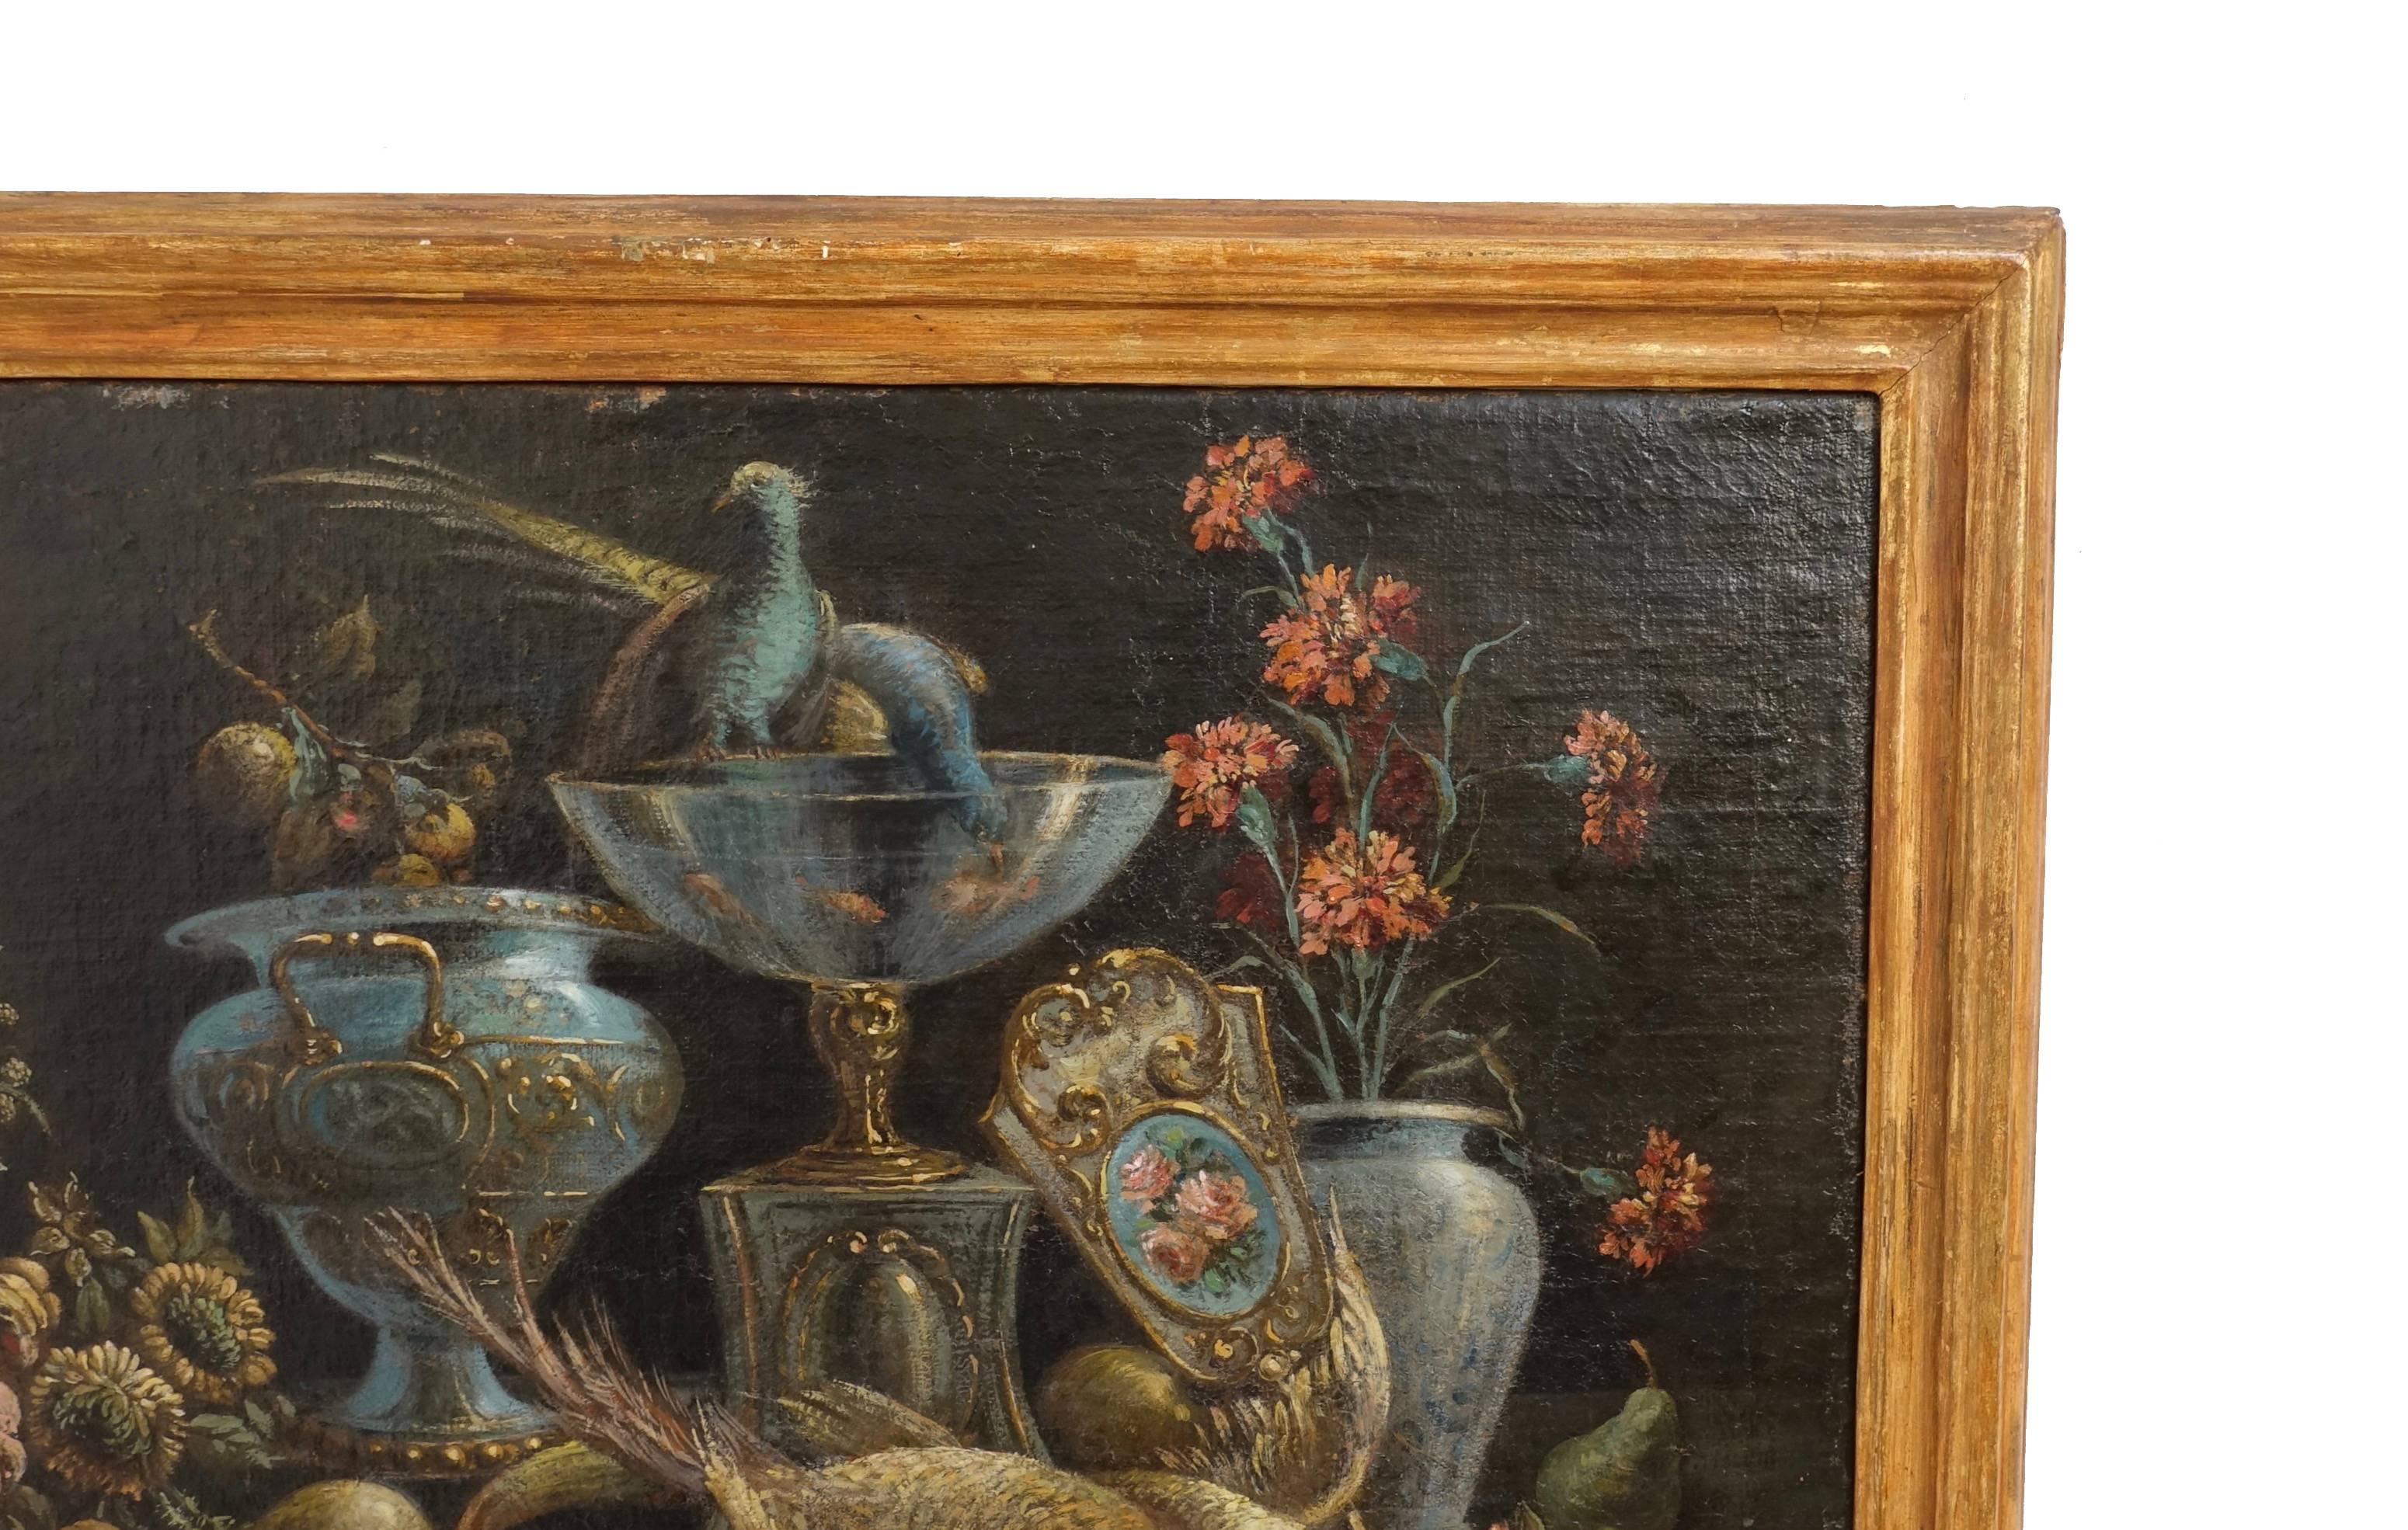 Gilt Still Life Painting of Venetian Glass' Flowers and Birds, 19th Century